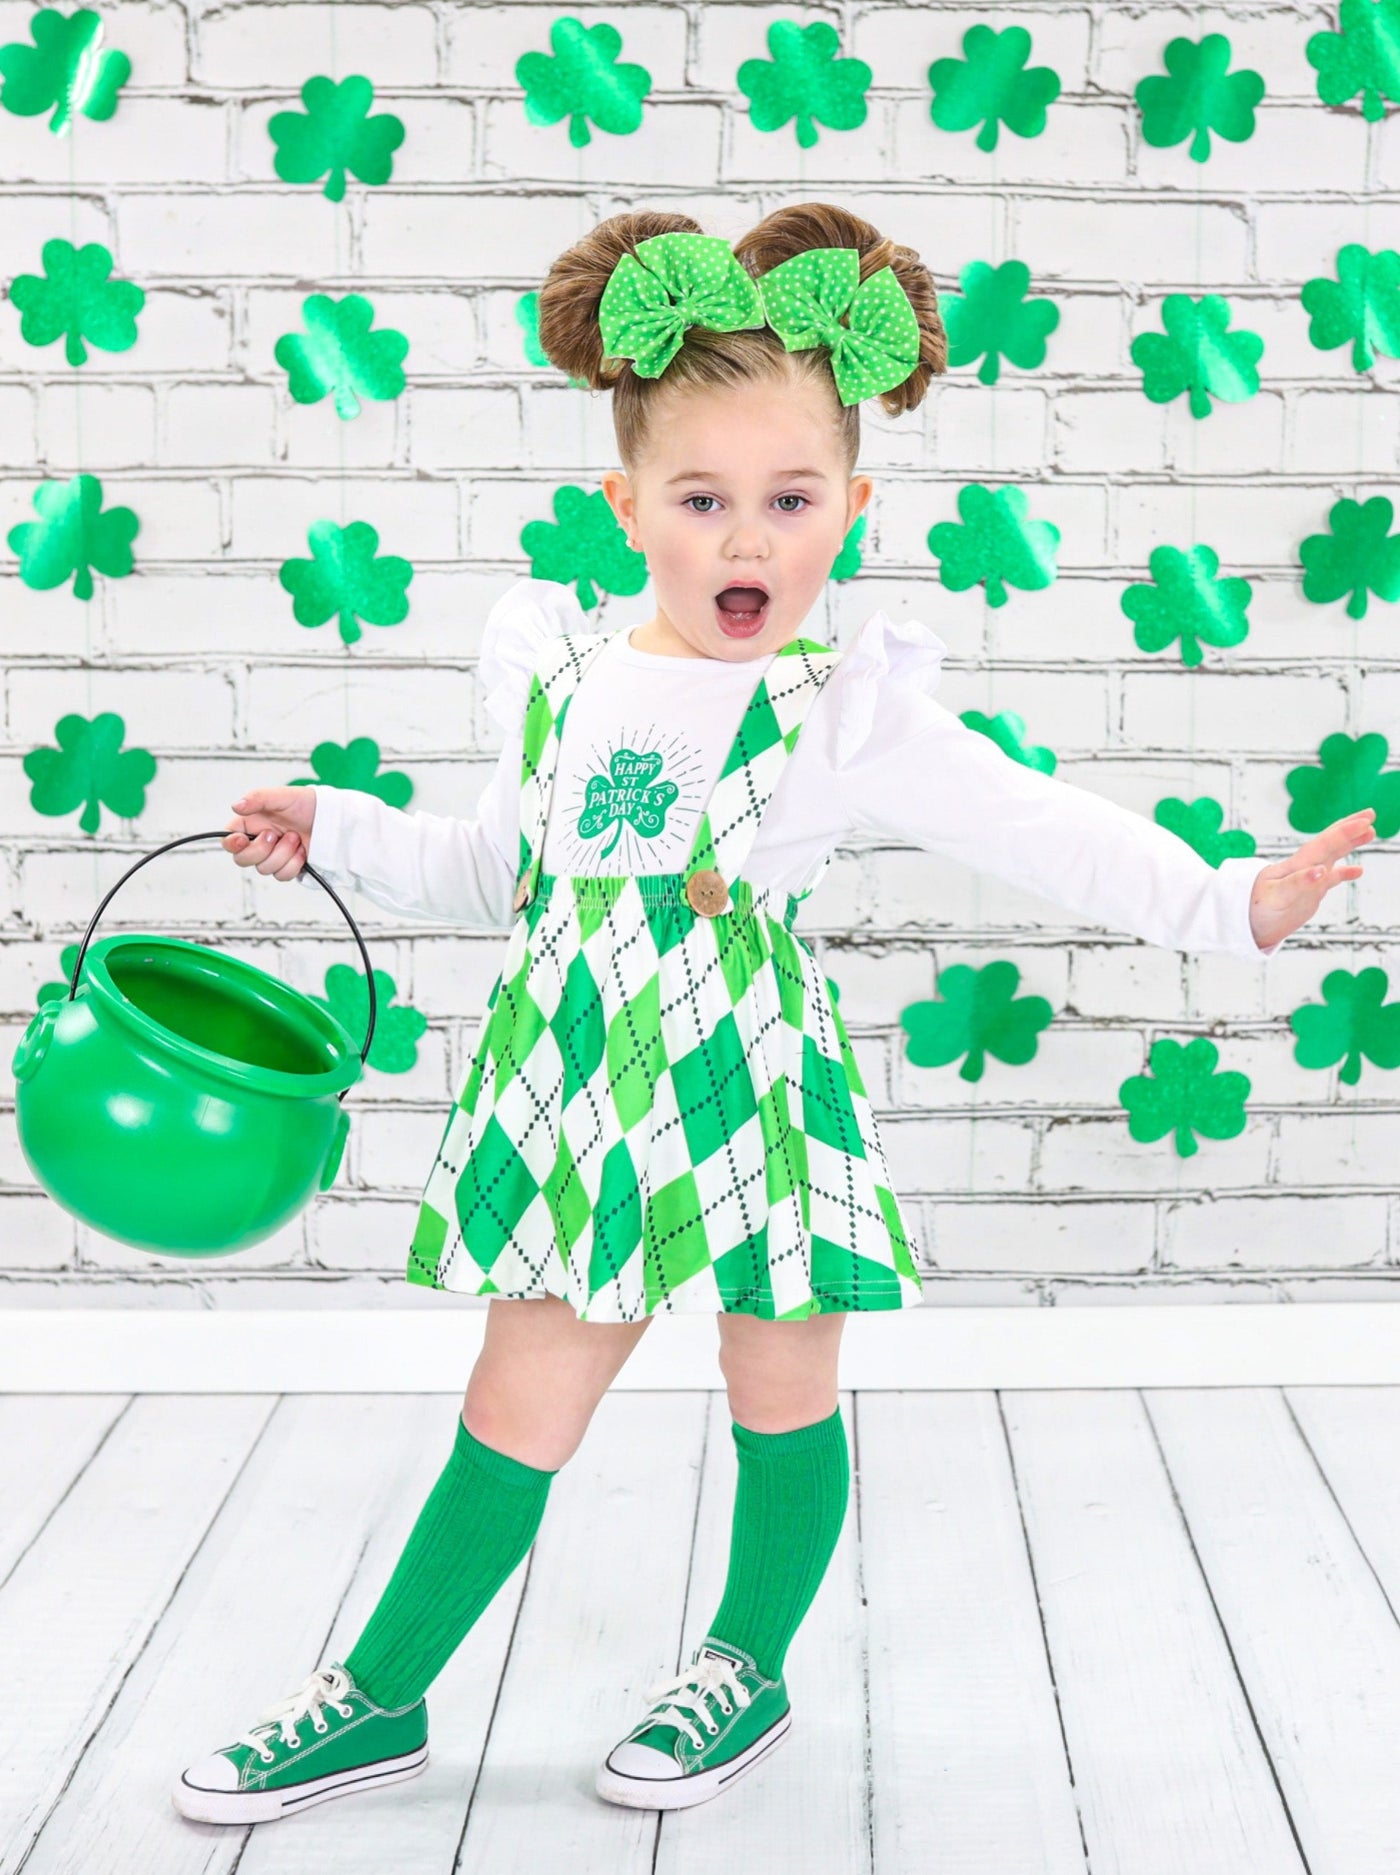 Girls "Happy St. Patrick's Day" Clover Top and Argyle Overall Skirt Set